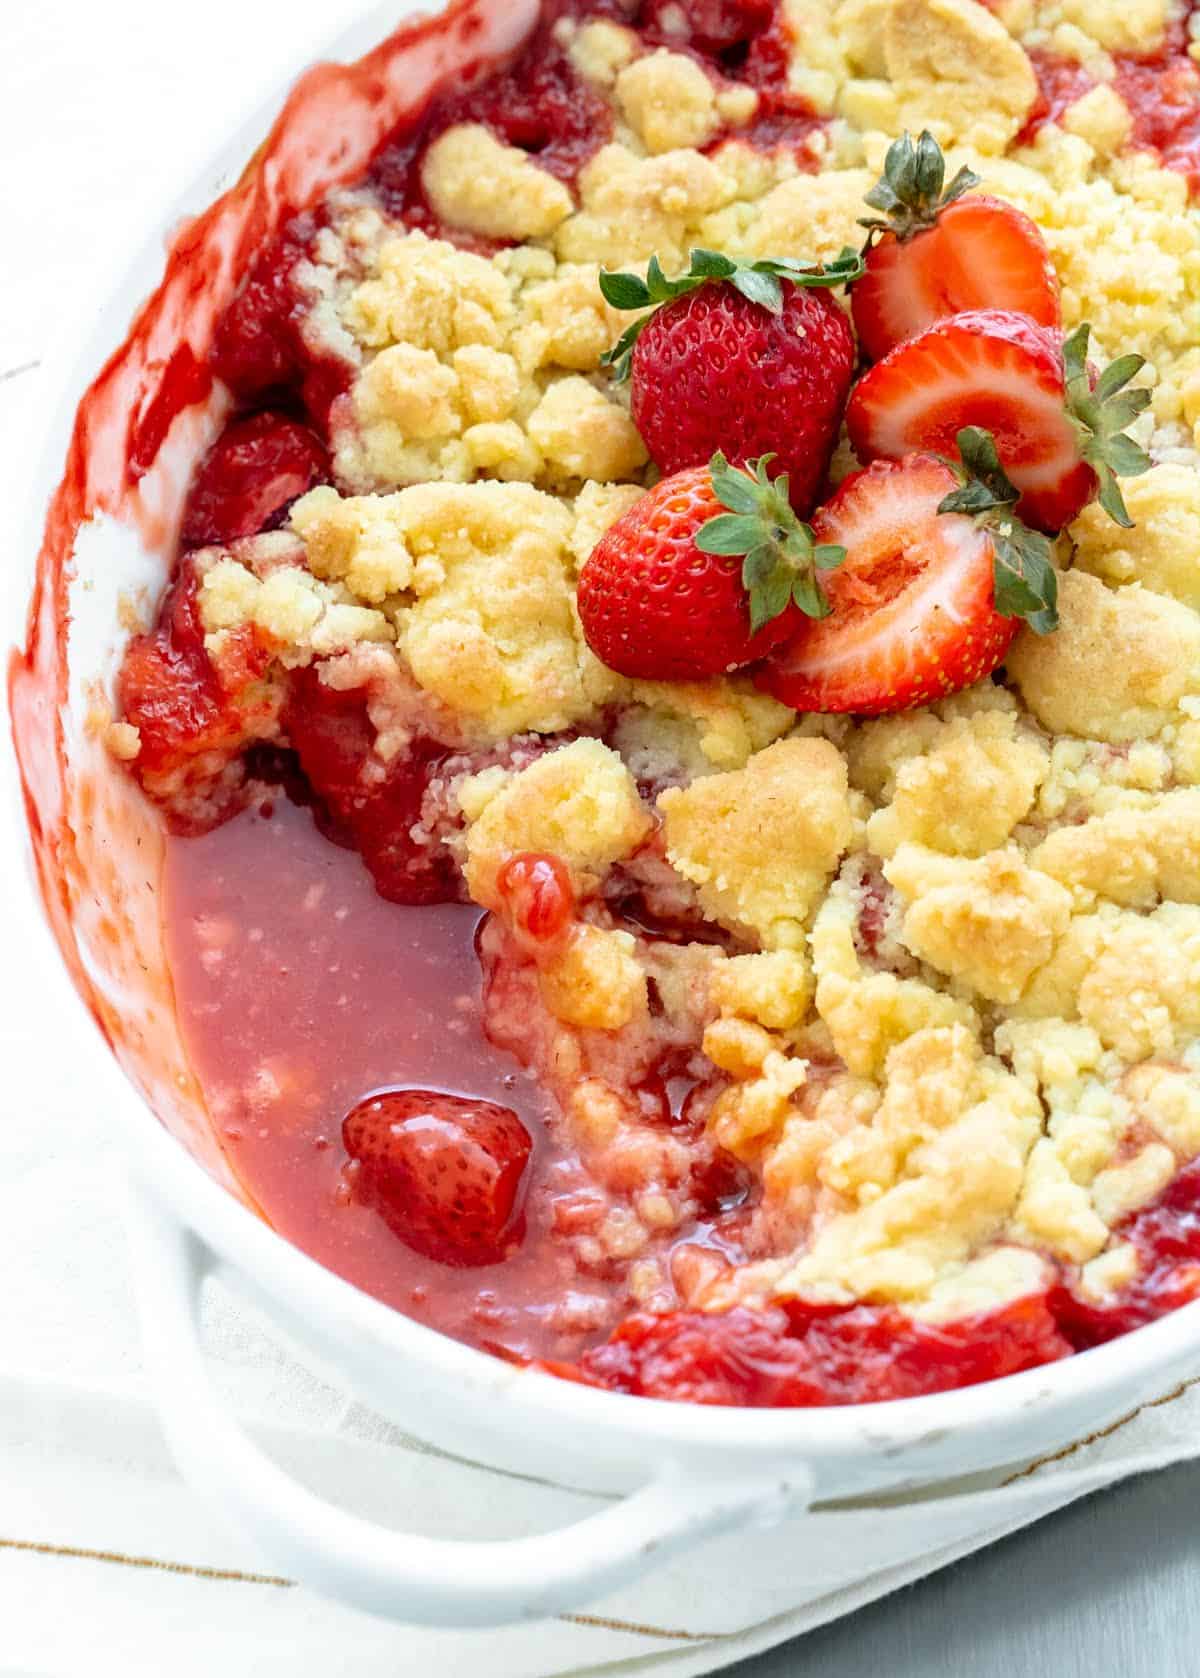 Partially eaten strawberry dump cake in a white ceramic dish with fresh strawberries on top. 